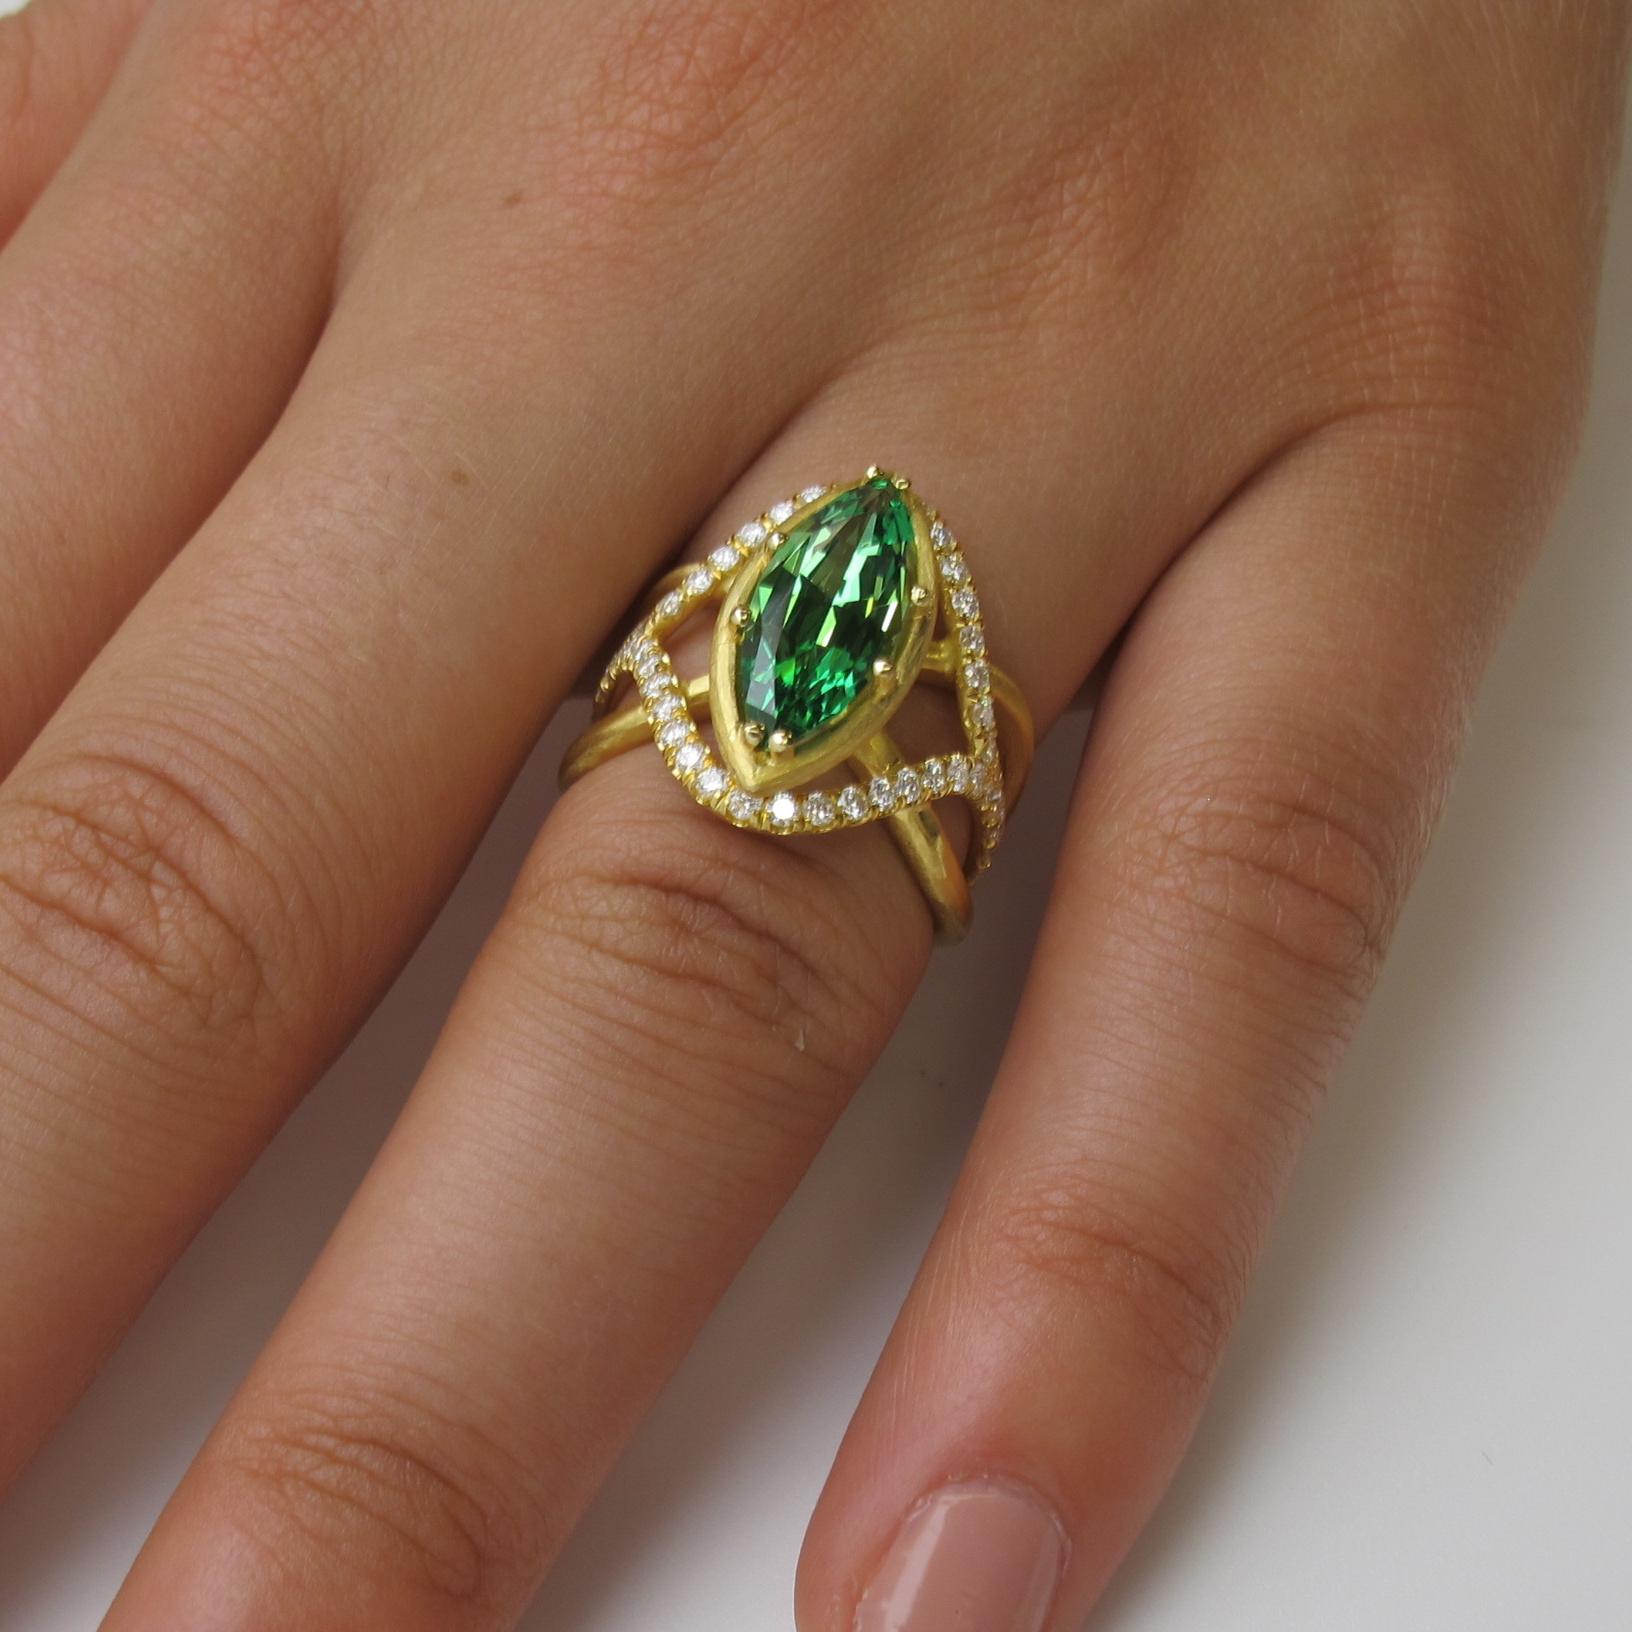 Tsavorite Garnet and Diamond Cocktail Ring in Yellow Gold, 2.95 Carats For Sale 5